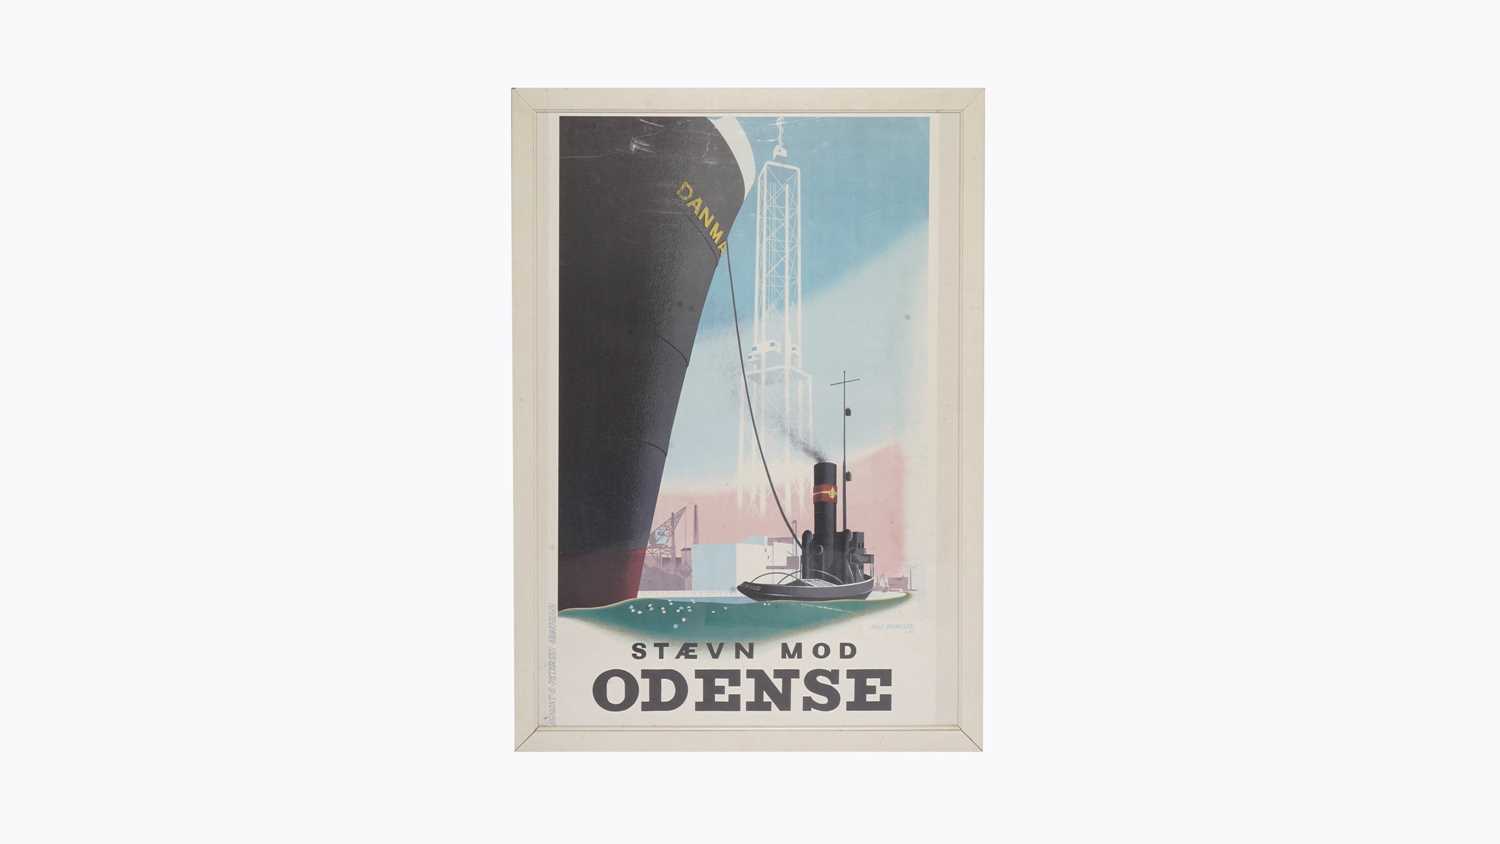 After Aage Rasmussen - Maersk Line and Odense advertising posters | offset lithographic prints - Image 2 of 10